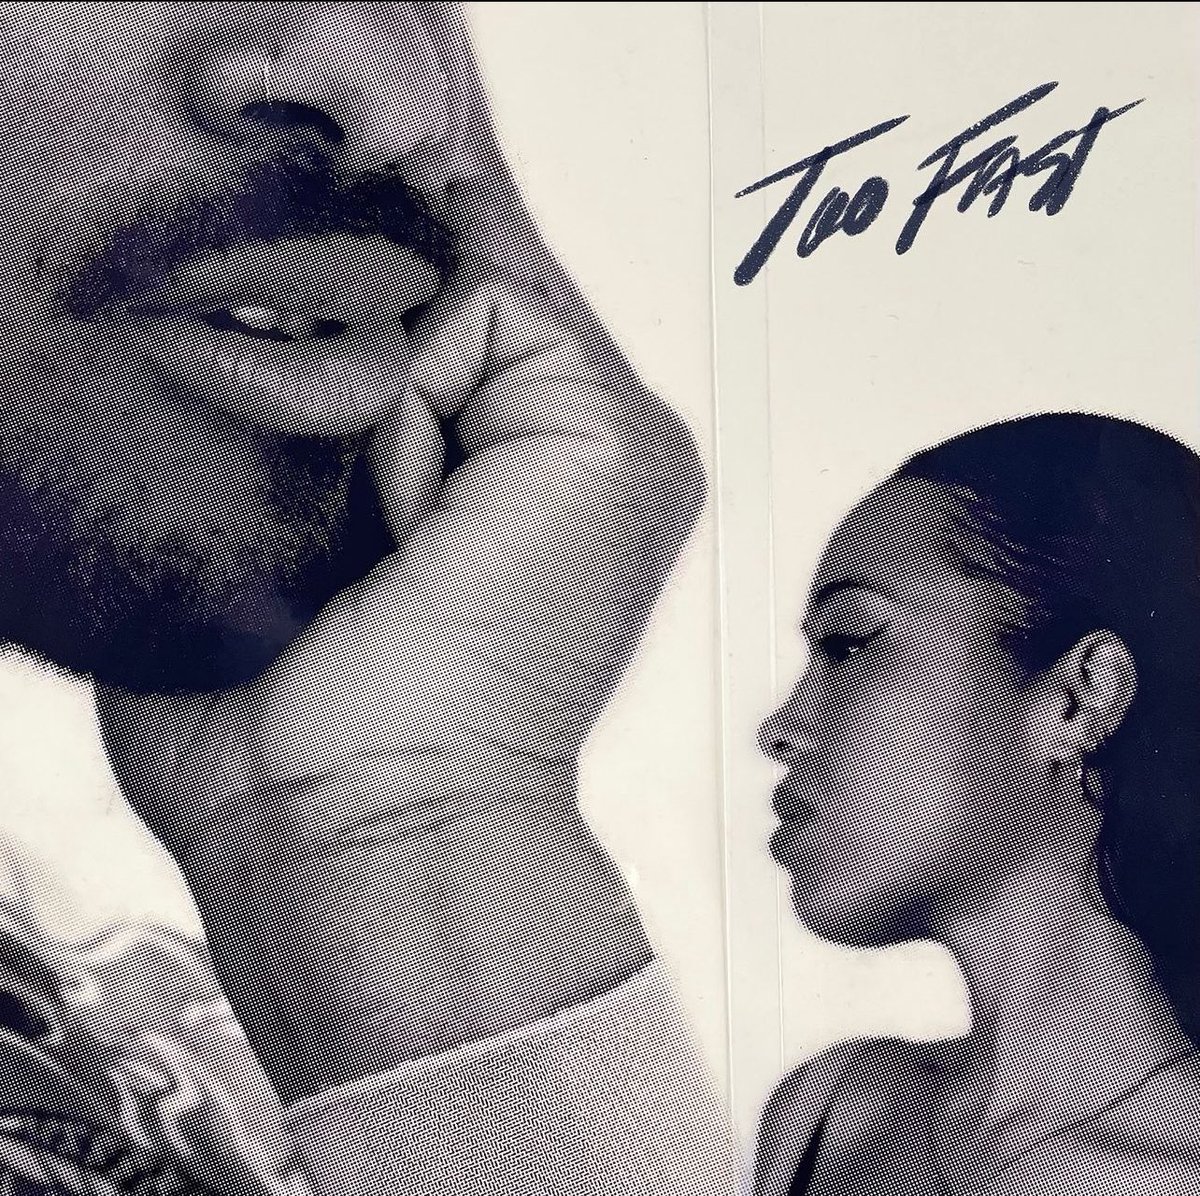 “Too Fast” @BeatsByESTA feat. @joycewrice & @DUCKWRTH OUT NOW 🏎️🏎️🏎️💫 co prod by yours truly 🎹